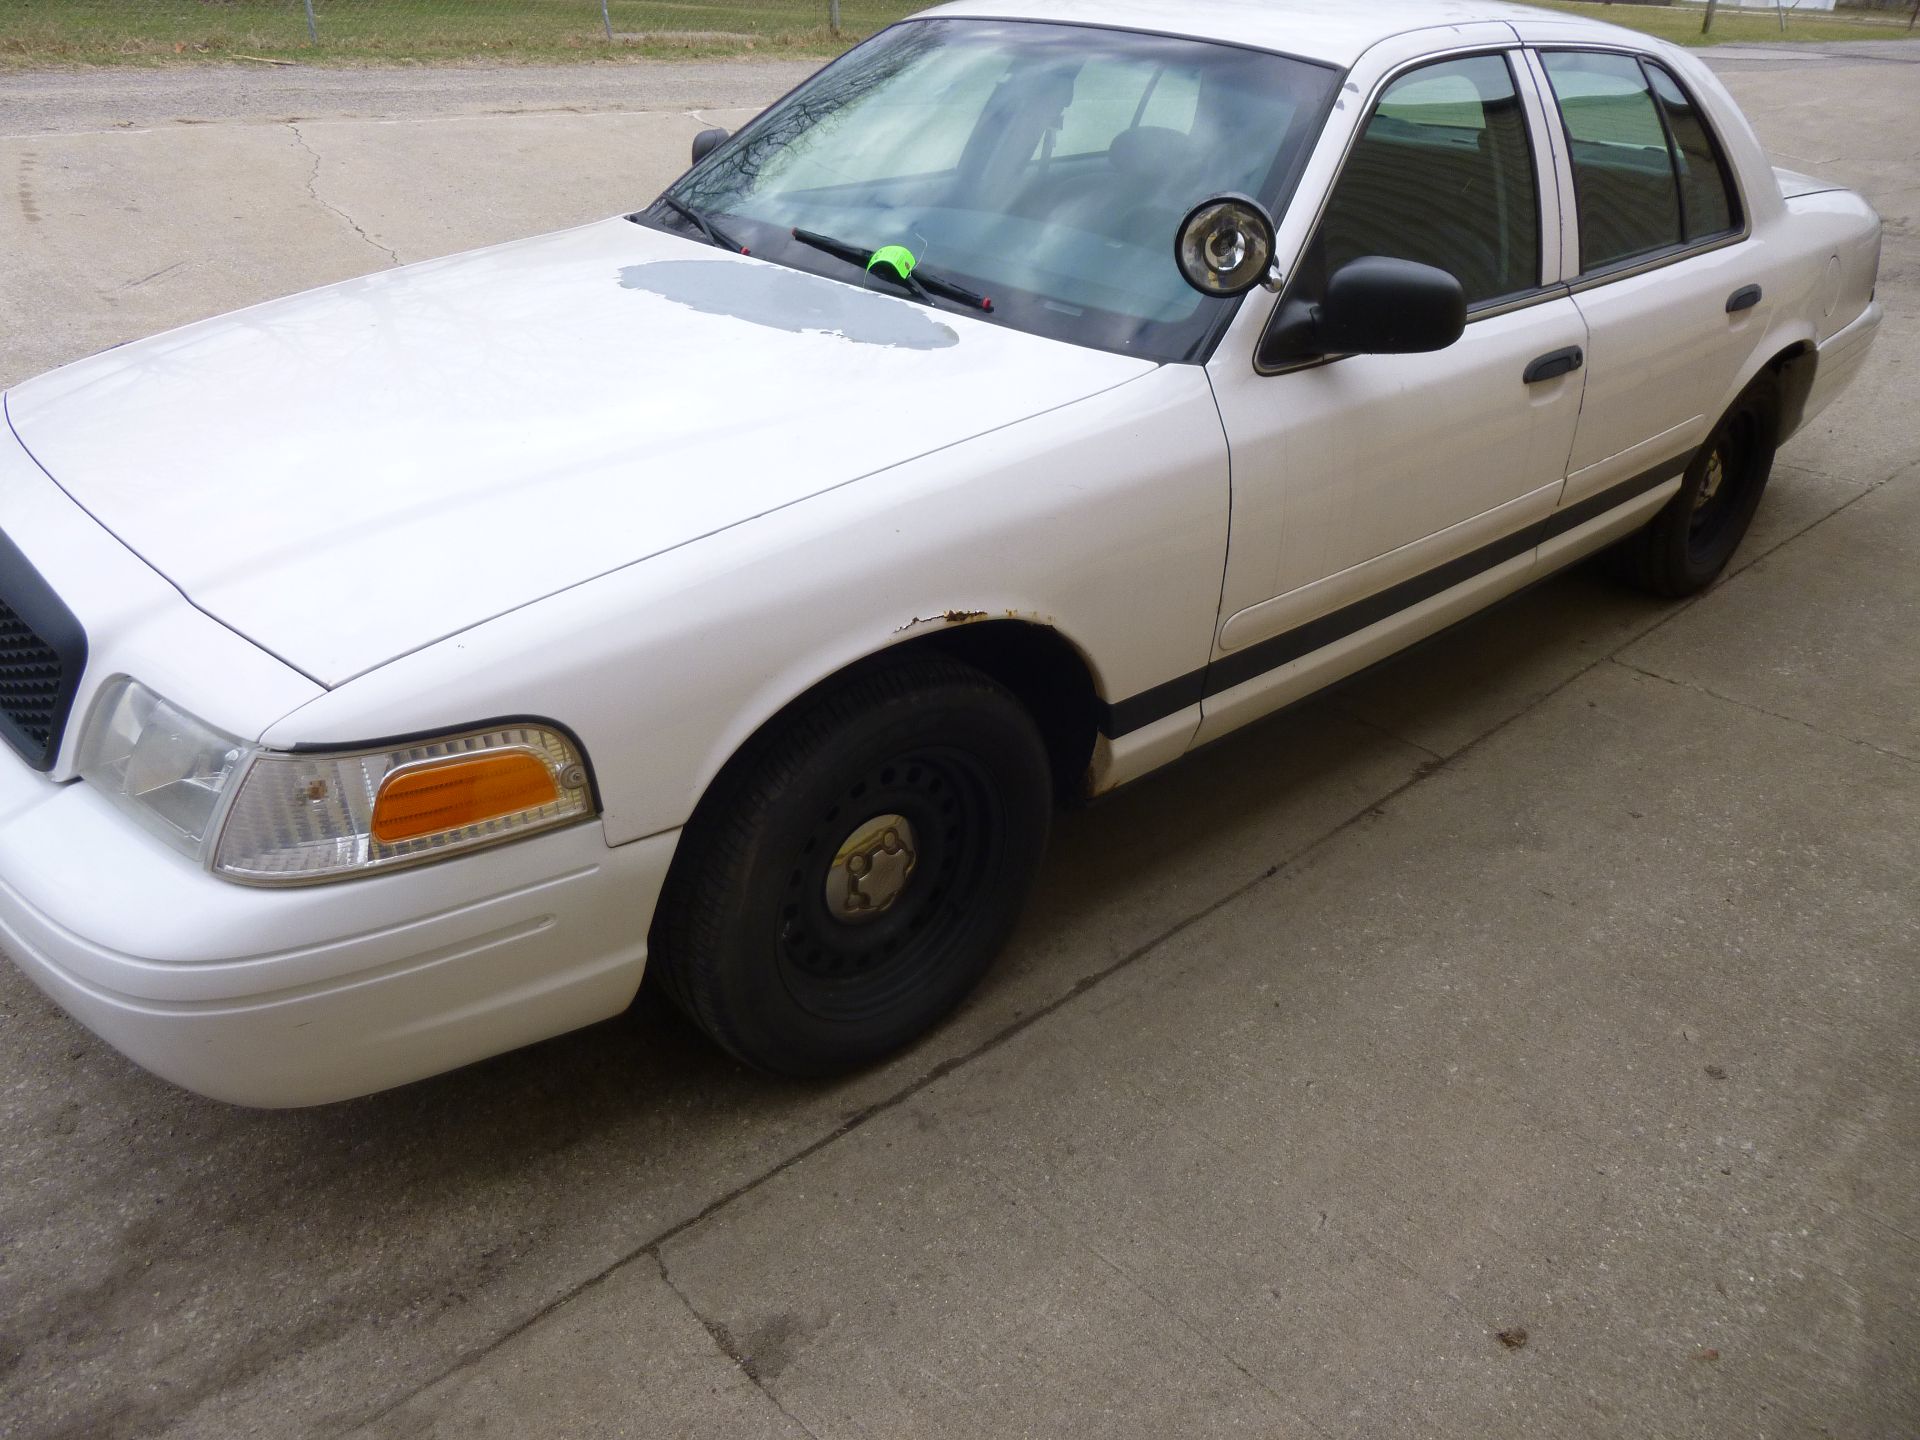 2002 Ford Crown Victoria Police Interceptor miles 112174 Vin # 2FAFP71W32X136232 CLEAR TITLE( - Image 4 of 10